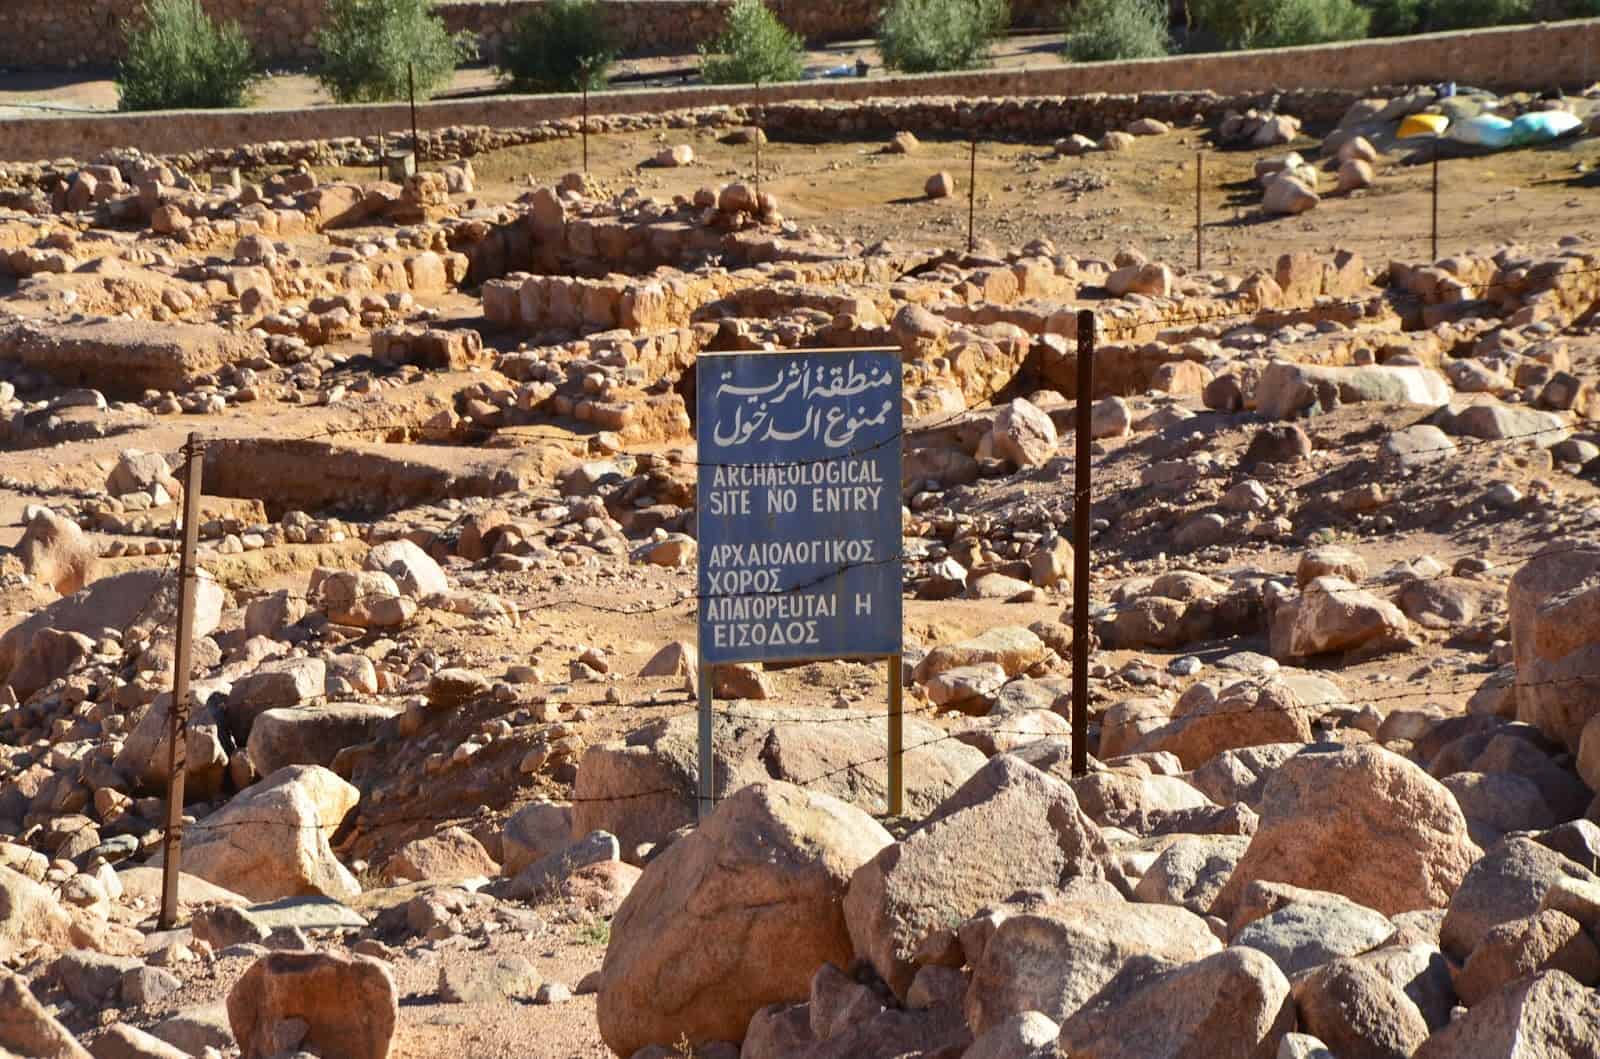 Archaeological site at Saint Catherine's Monastery in Sinai, Egypt